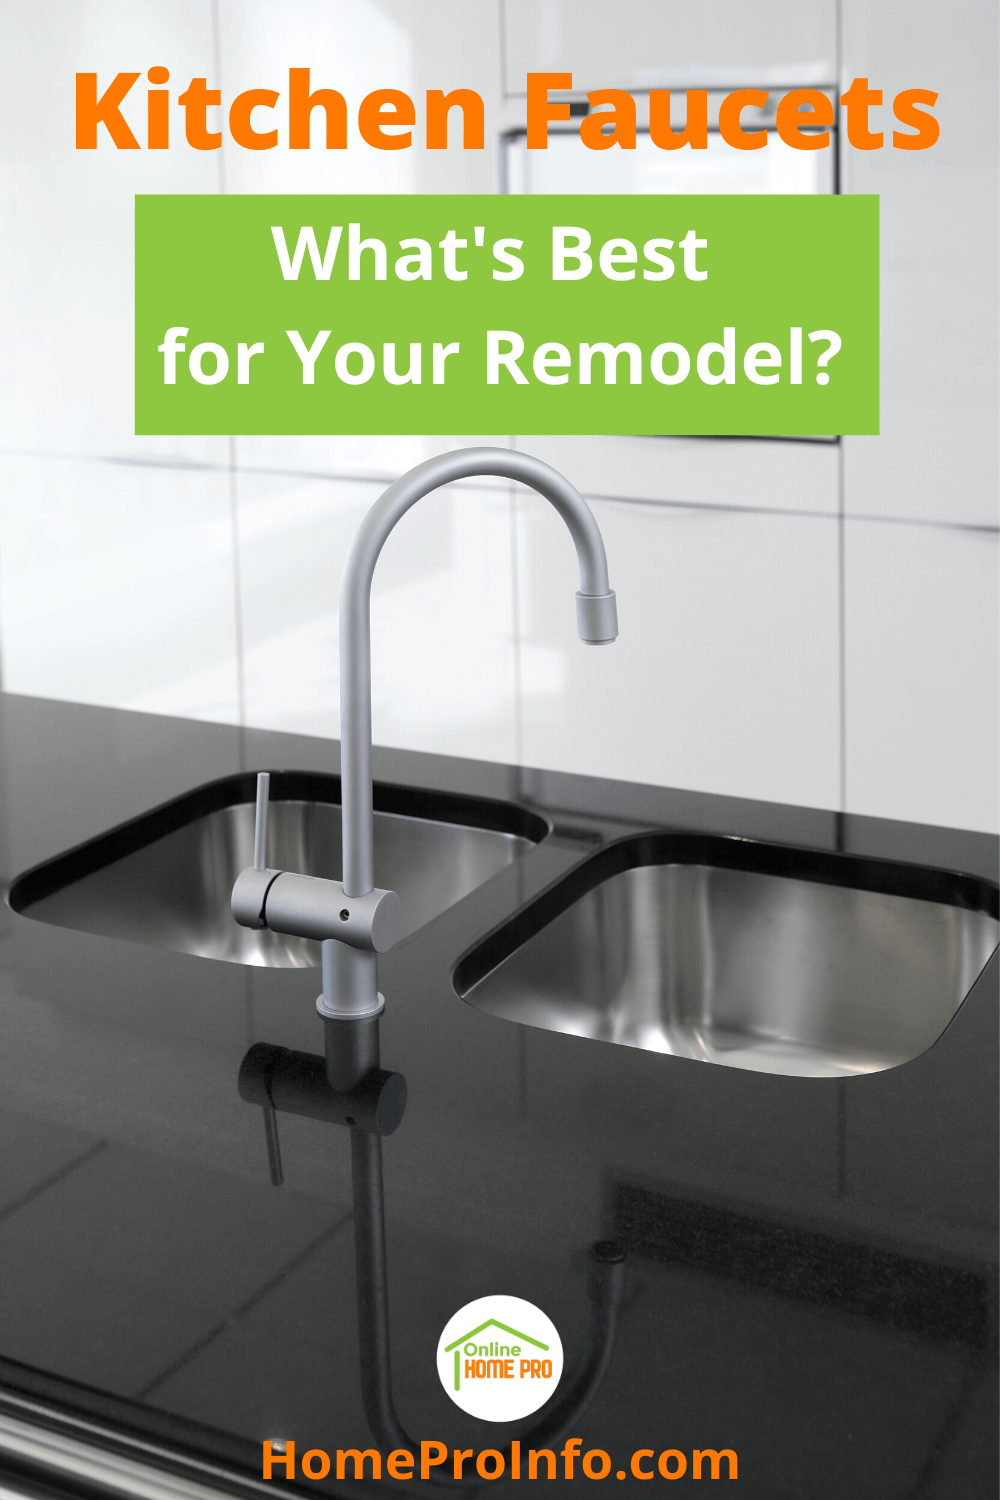 kitchen faucets and remodeling